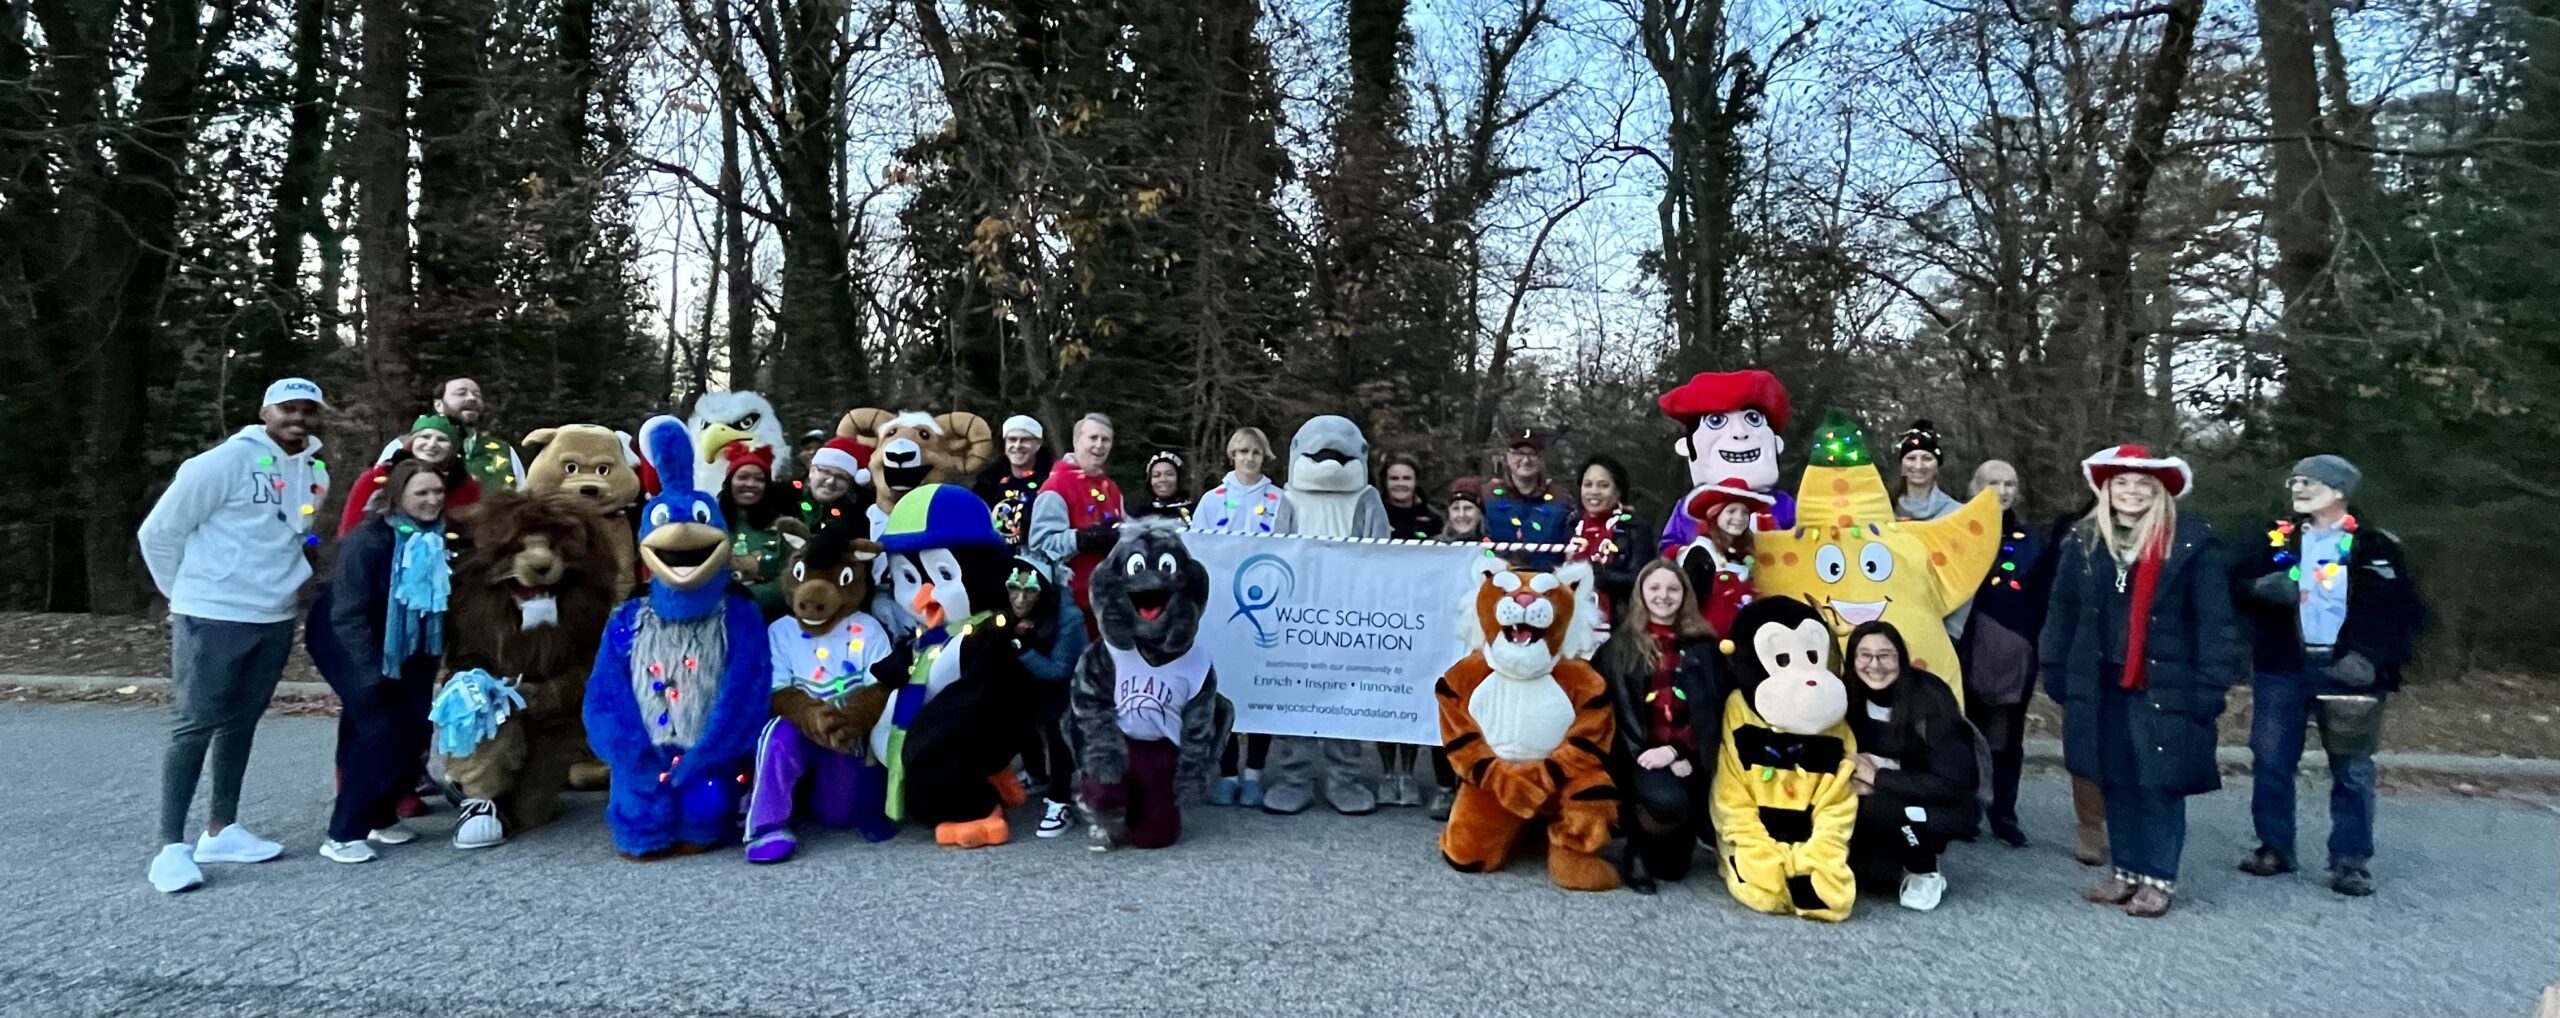 Schools Foundation marches in the Williamsburg Christmas Parade WJCC